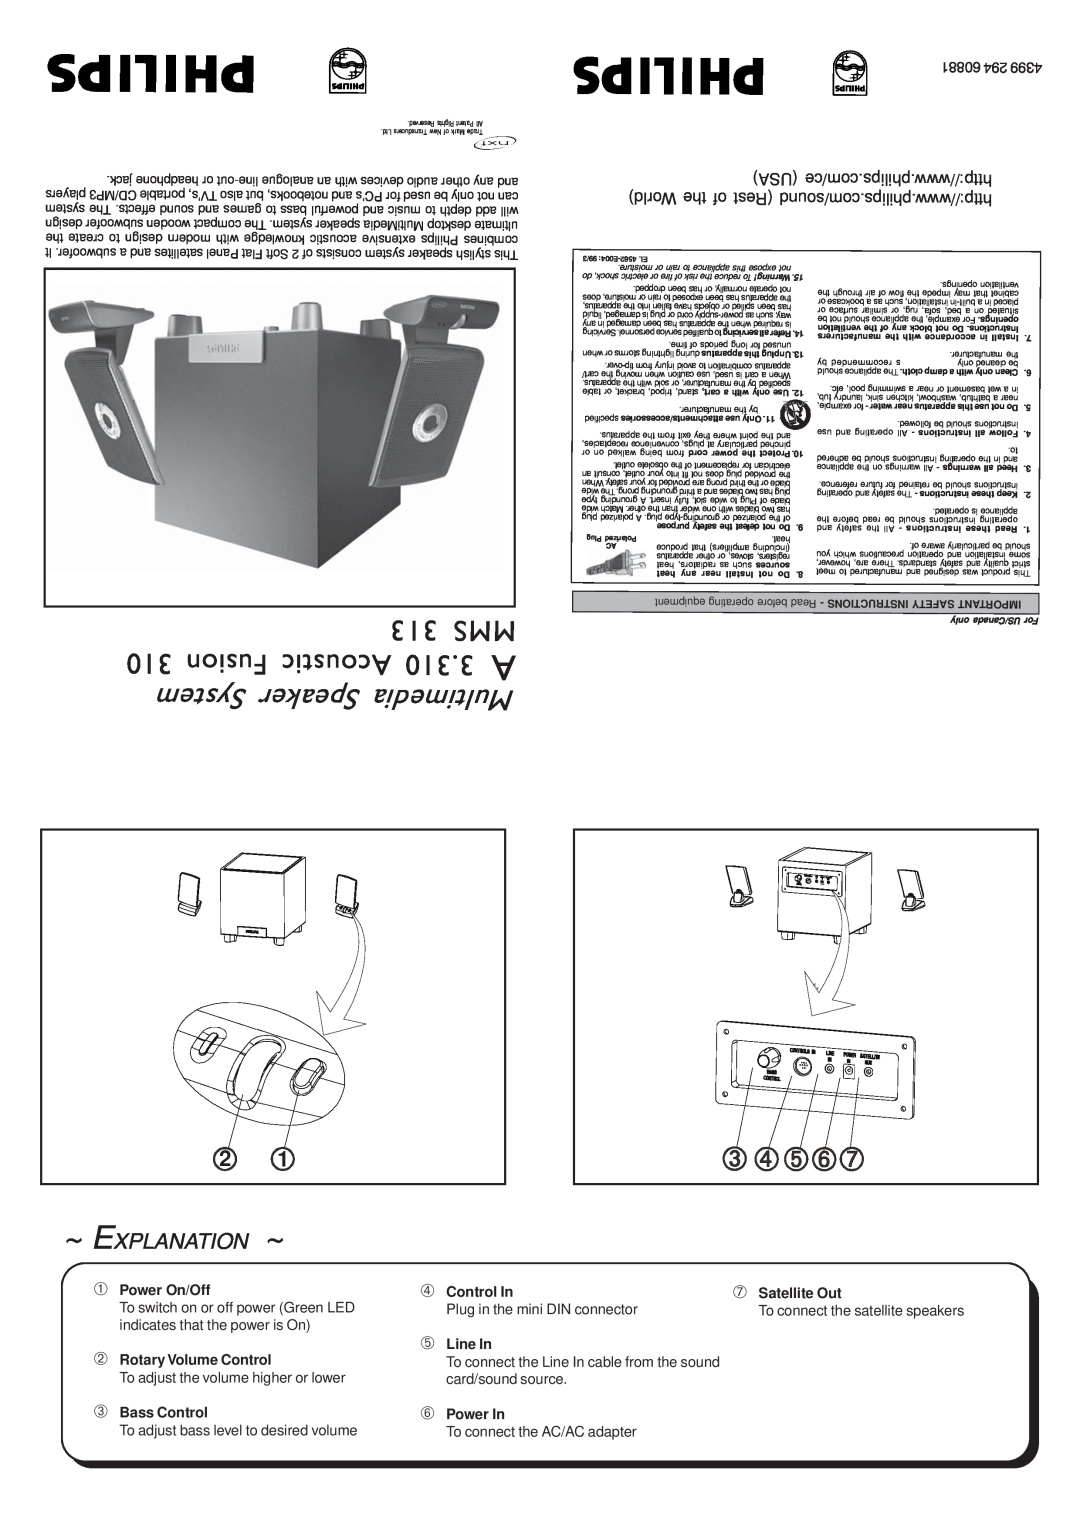 Philips MMS 313 important safety instructions 313 MMS, Fusion Acoustic, System erSpeak Multimedia, ~ Explanation, ➄Line In 